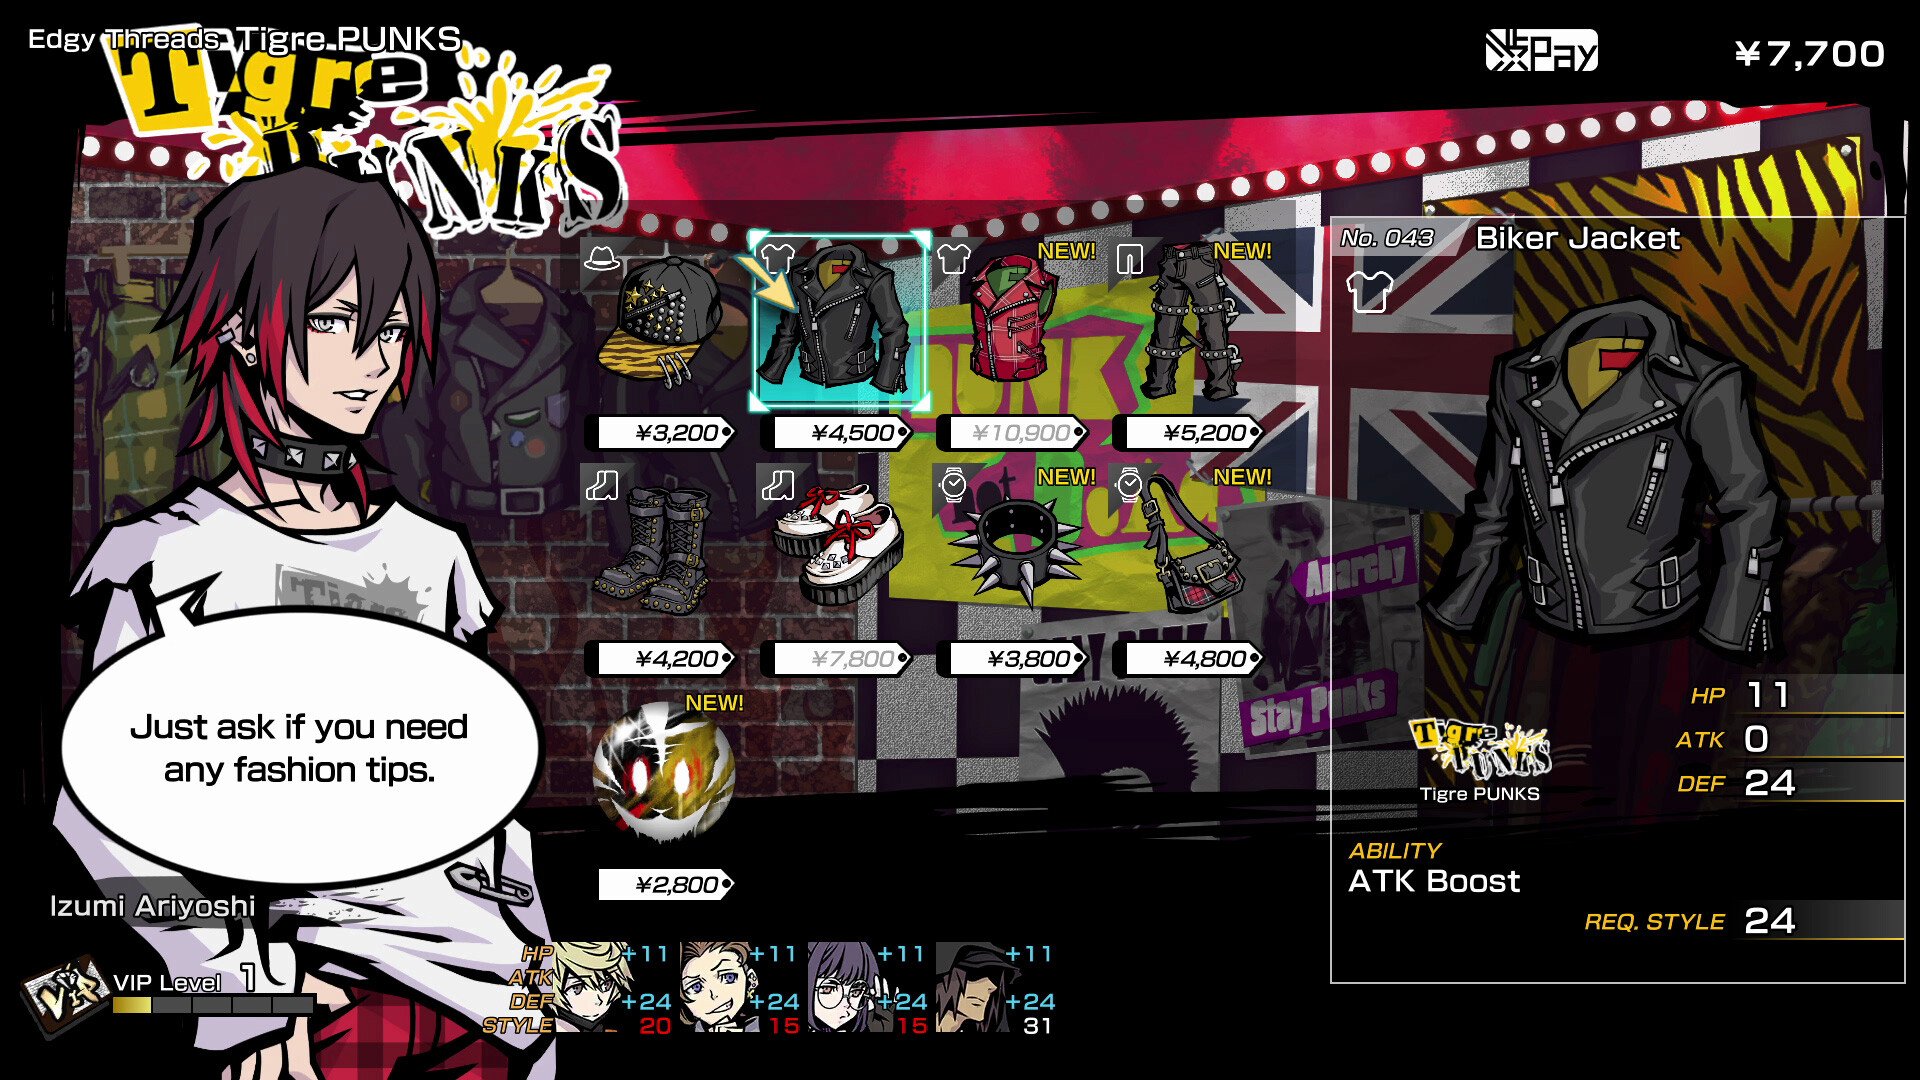 NEO The World Ends With You 4